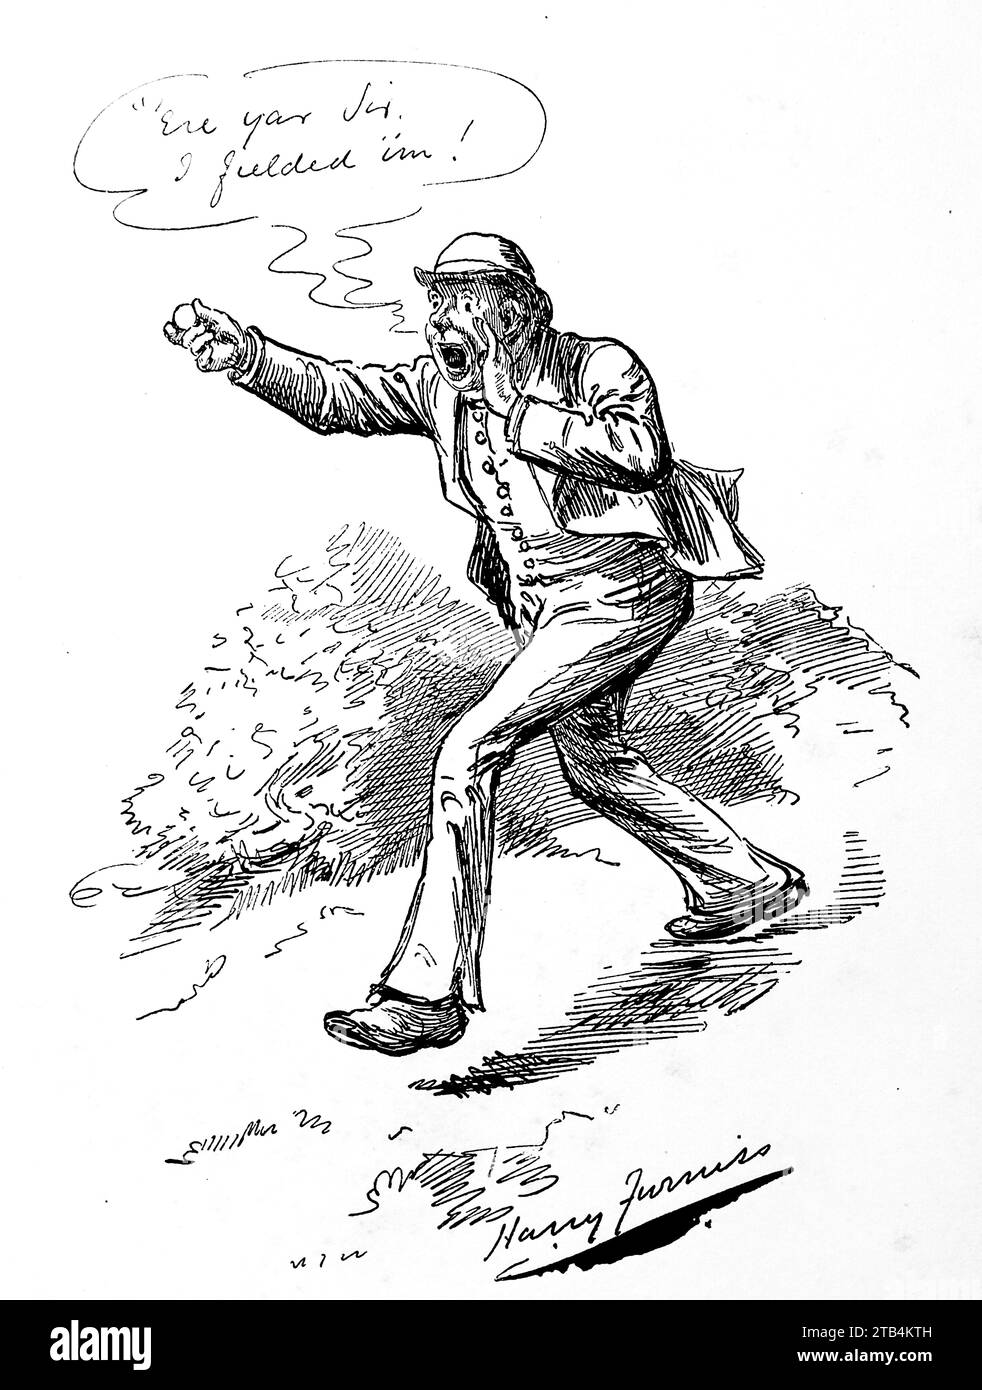 ‘Arry, A Sketch on London Links, a man finds a golf ball, by H. Furniss. From an illustration about golf, dating from 1889 to 1901. The history of golf is a long one. Though its origins are disputed, historians are generally agreed that what is known as “modern” golf began in the Middle Ages in Scotland. It was not until the mid to late nineteenth century that this sport became more popular in wider Britain, the British Empire and then the United States. Over the years the humble golf ball and golf club have changed vastly. Stock Photo